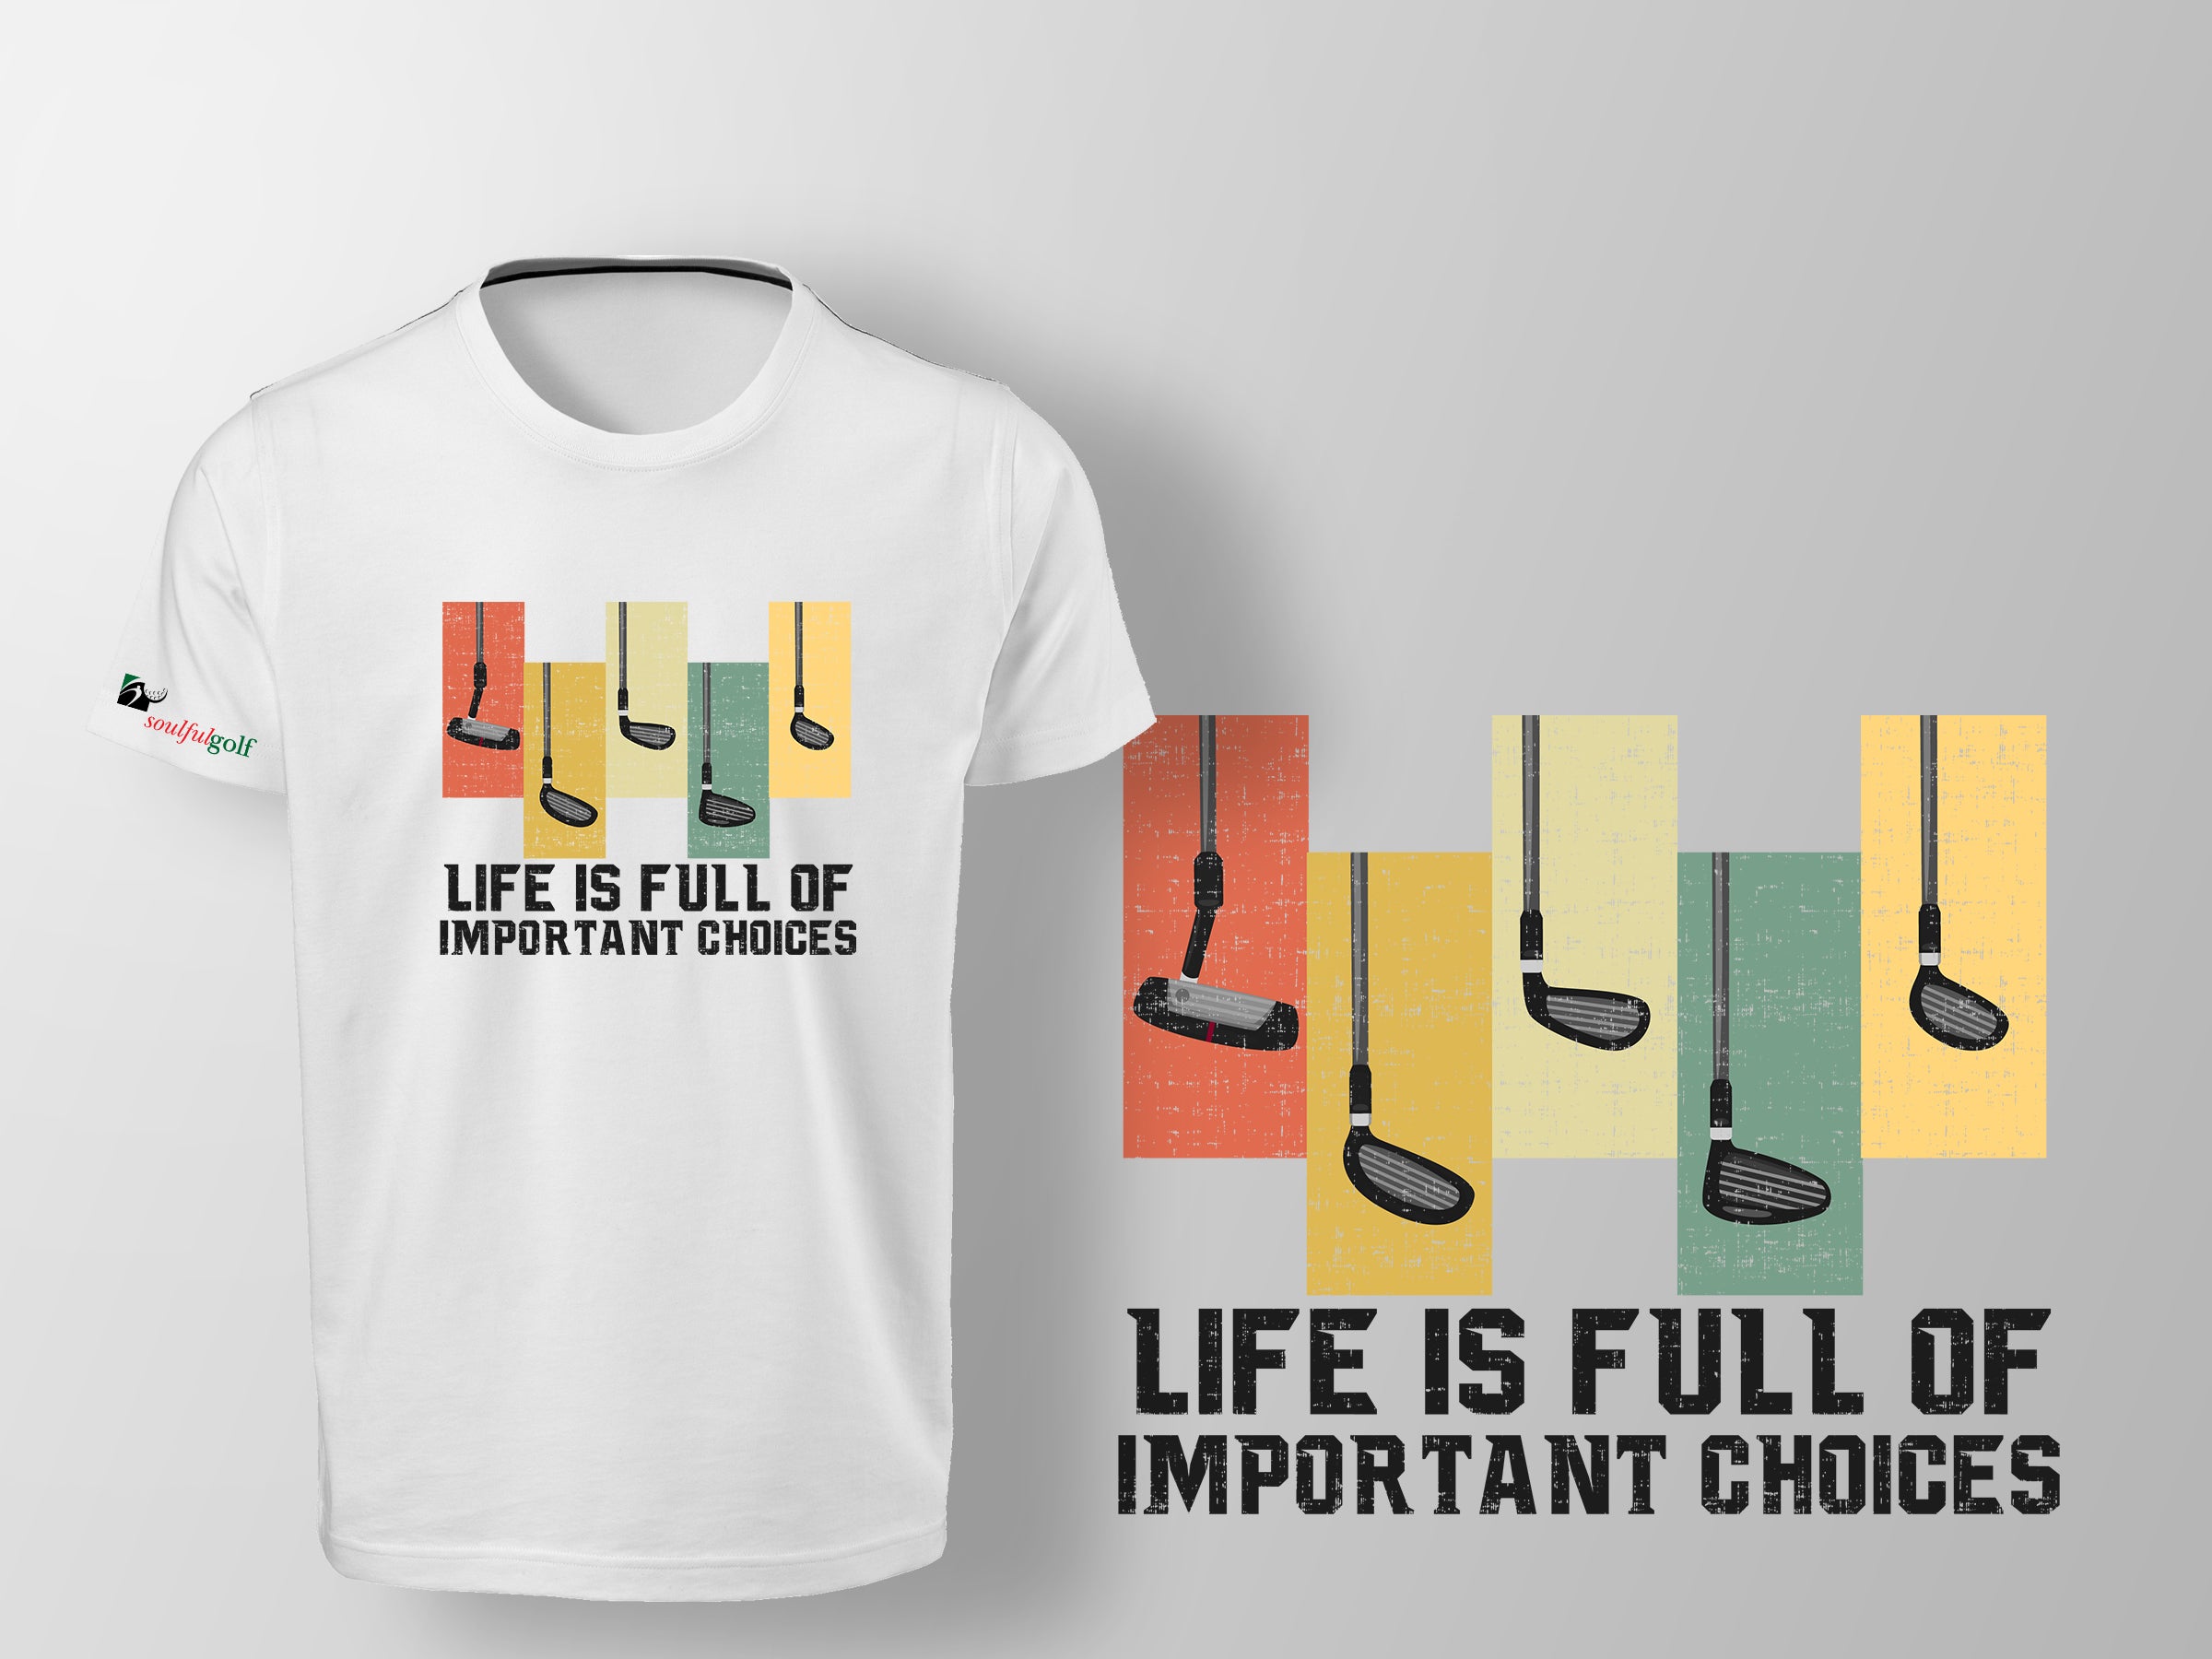 The Life Is Full Of Important Choices - Golf "Tee" Shirt